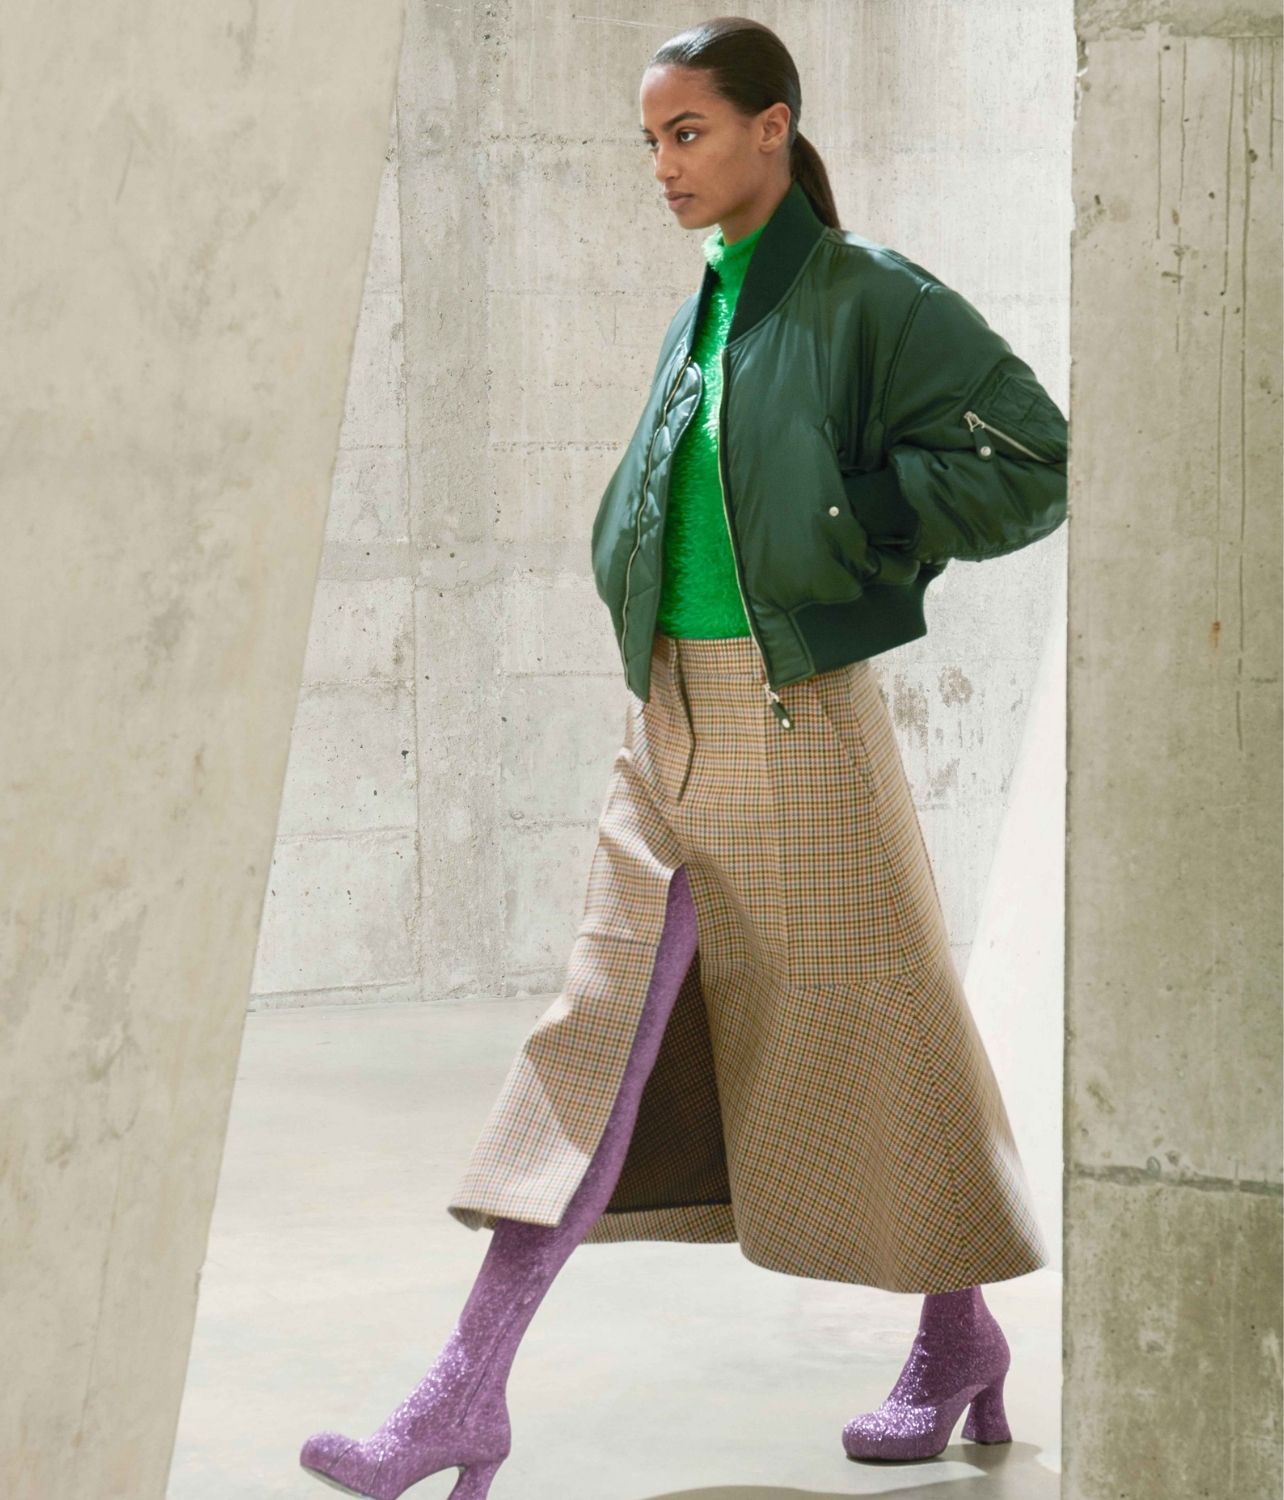 Woman walking on runway in Stella McCartney with green shirt and jacket, paired with a plaid skirt and thigh high purple glitter boots